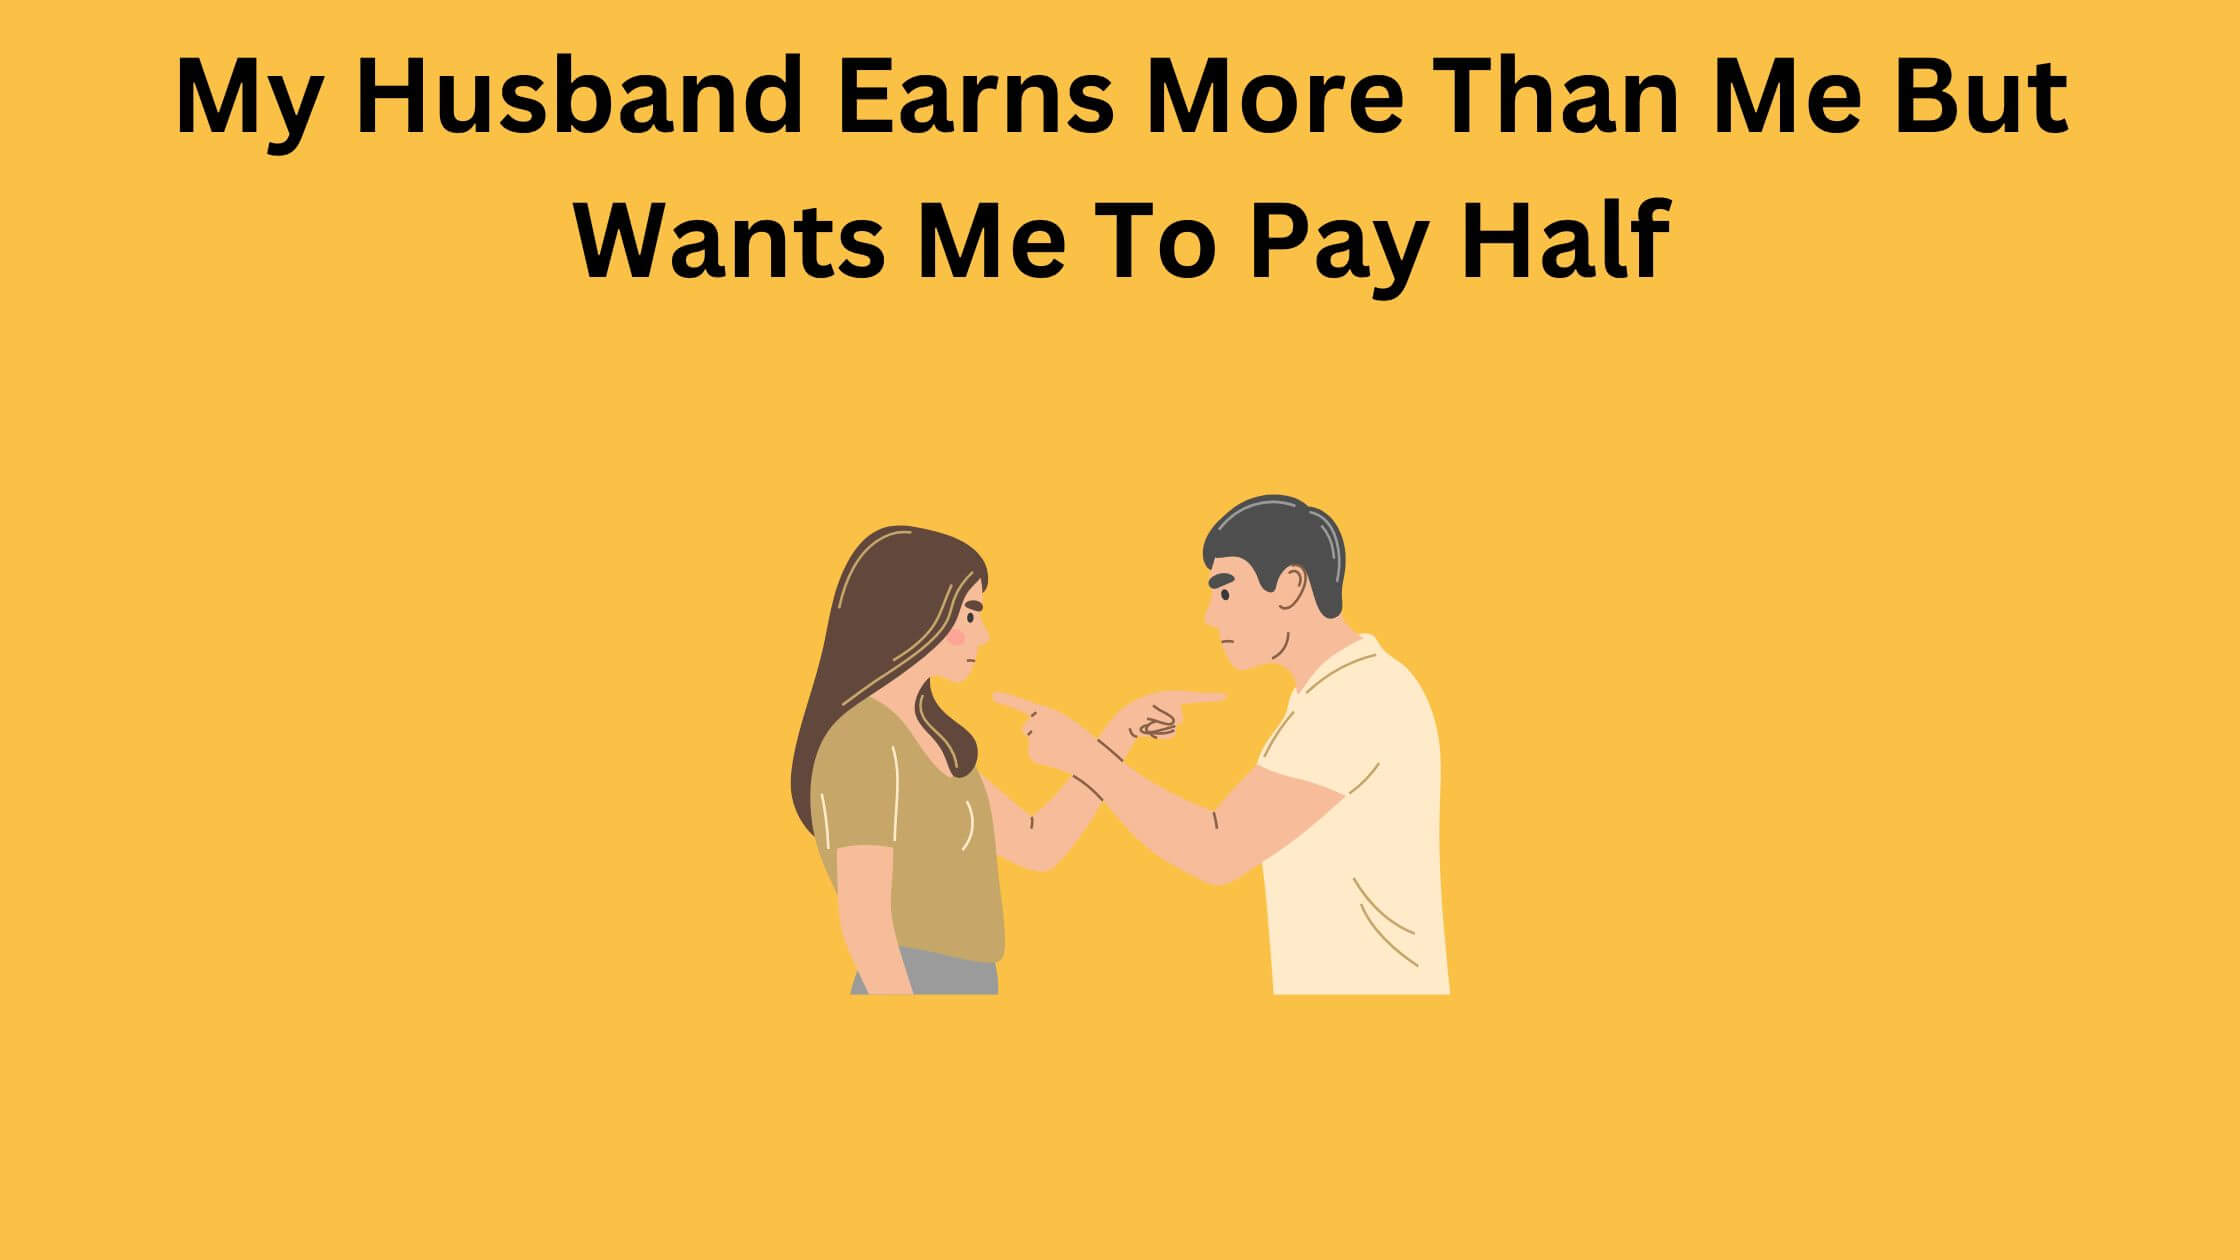 My Husband Earns More Than Me But Wants Me To Pay Half: 13 ways to respond